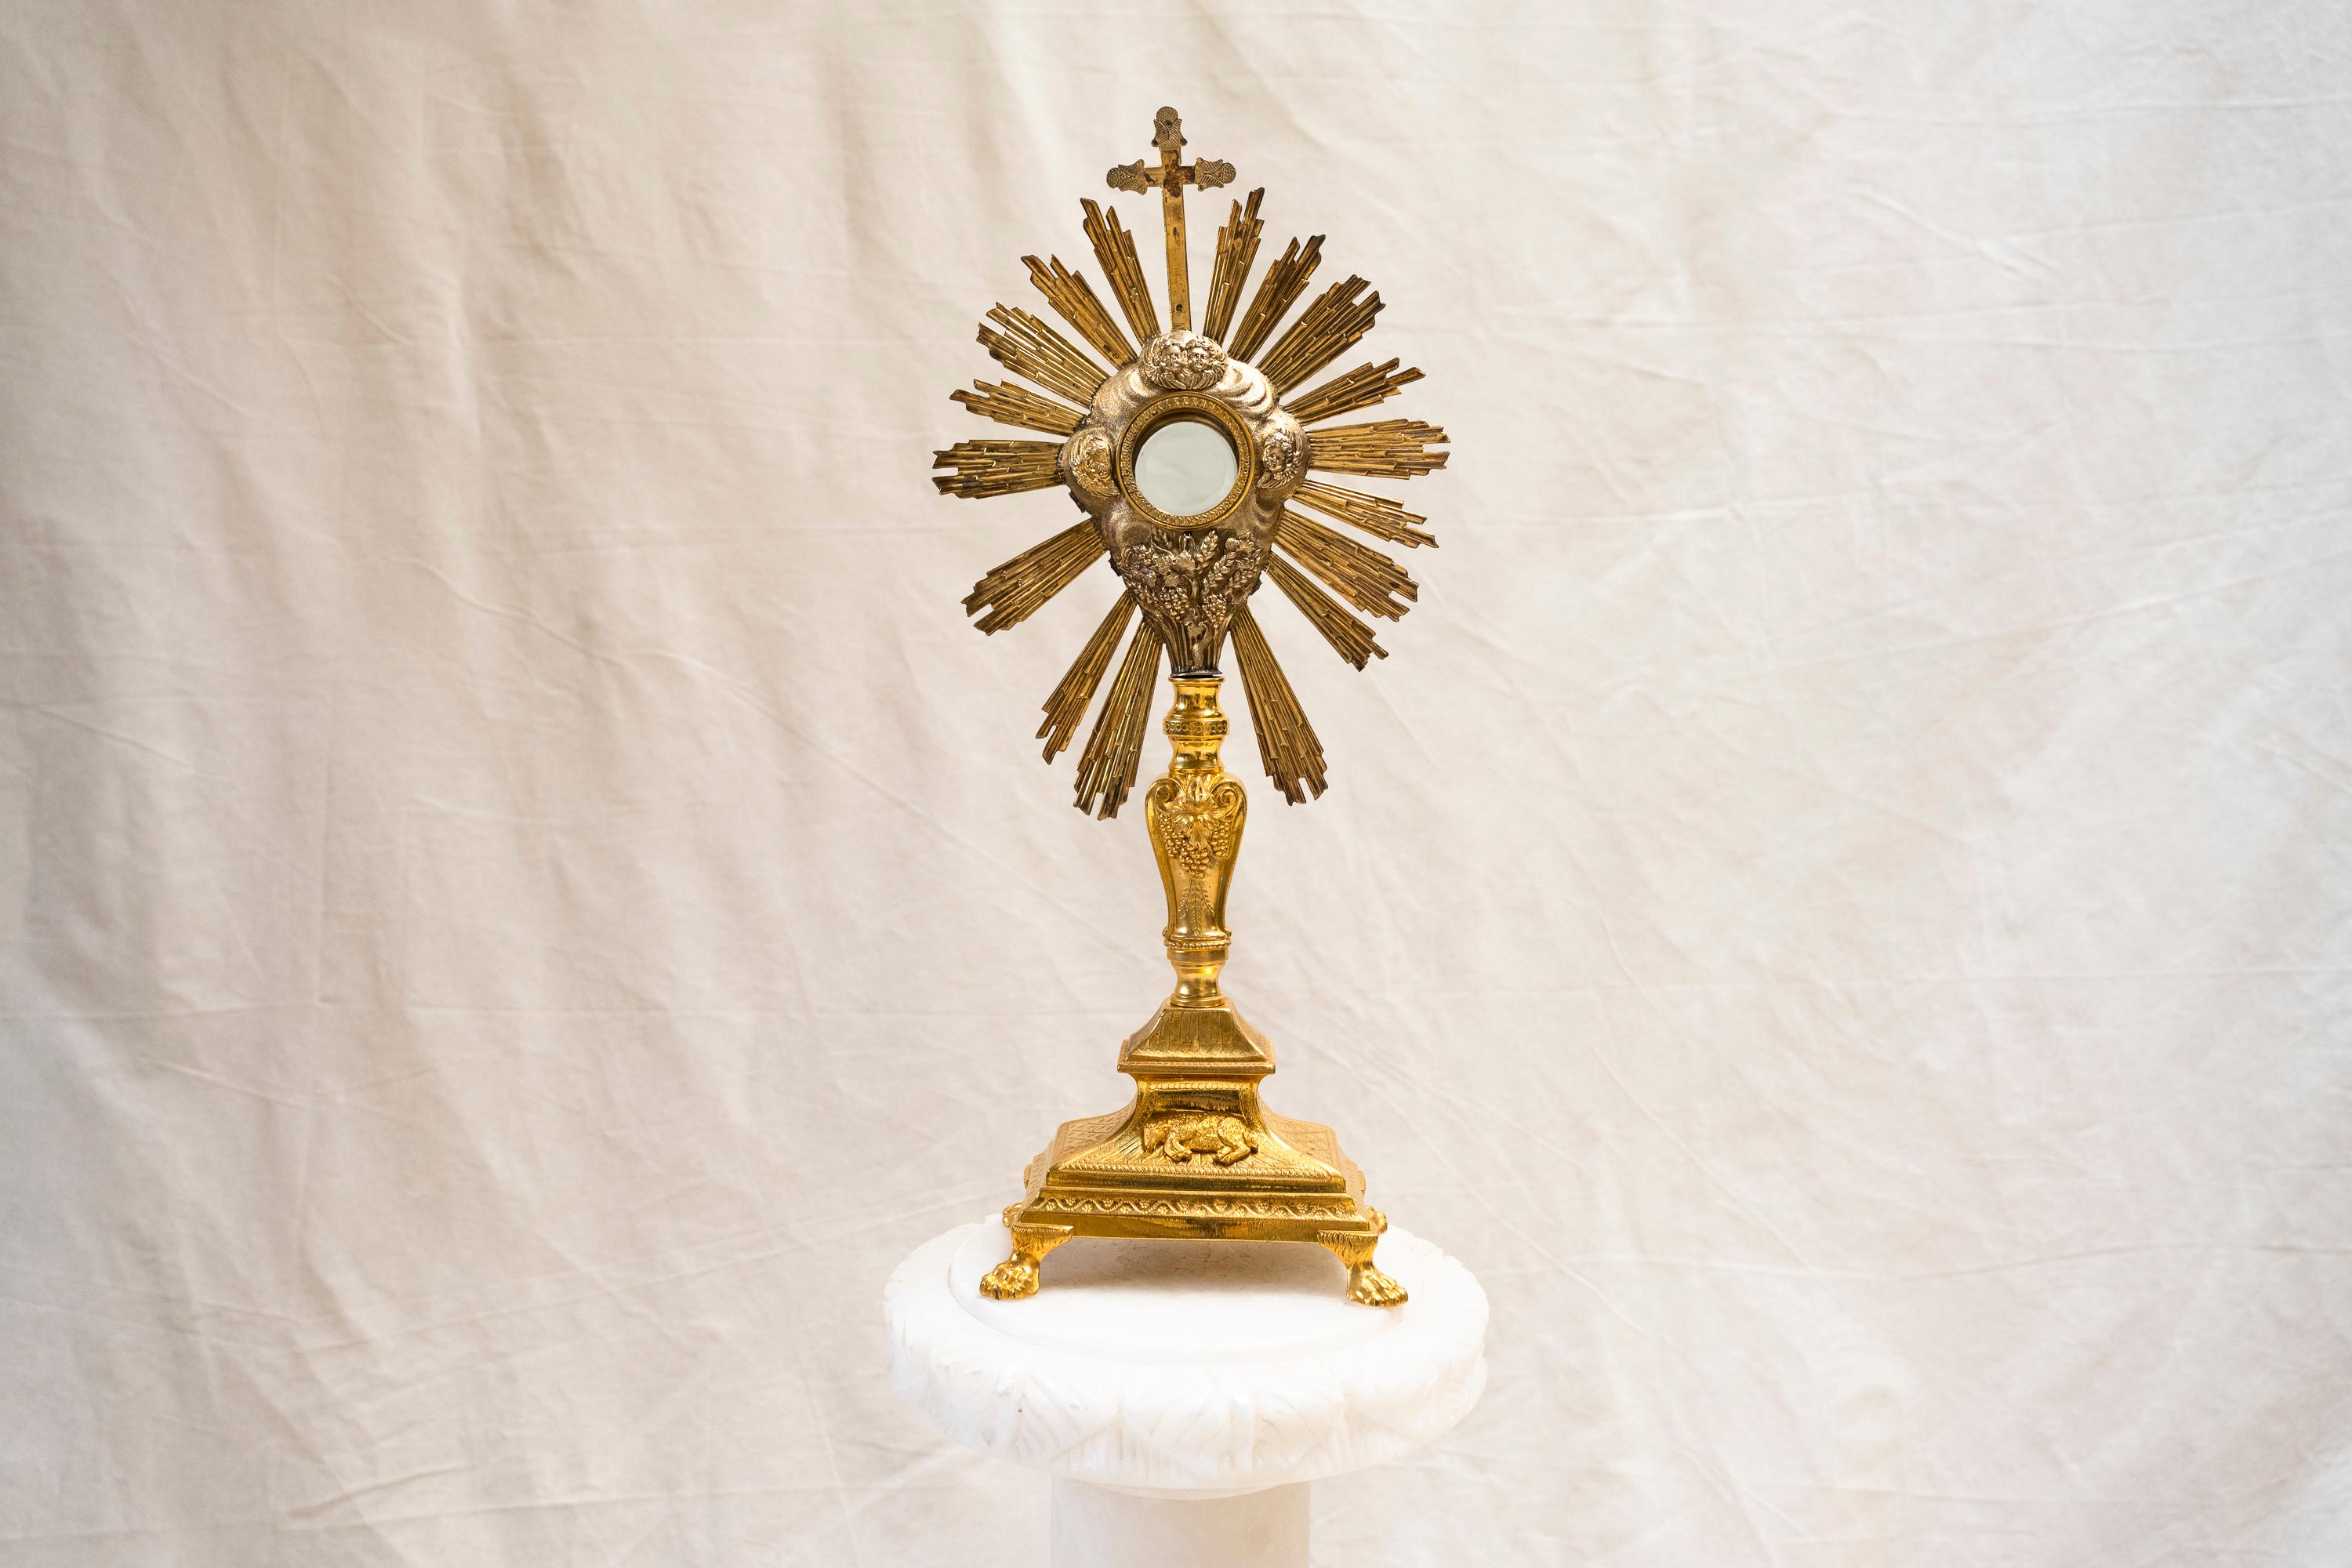 A silver and gold monstrance with travel case (c. 1890). Also known as an ostensorium, this vessel was used as a reliquary for display in the private residence of a wealthy French family. 

Provenance: A private mansion in Toulouse, France.